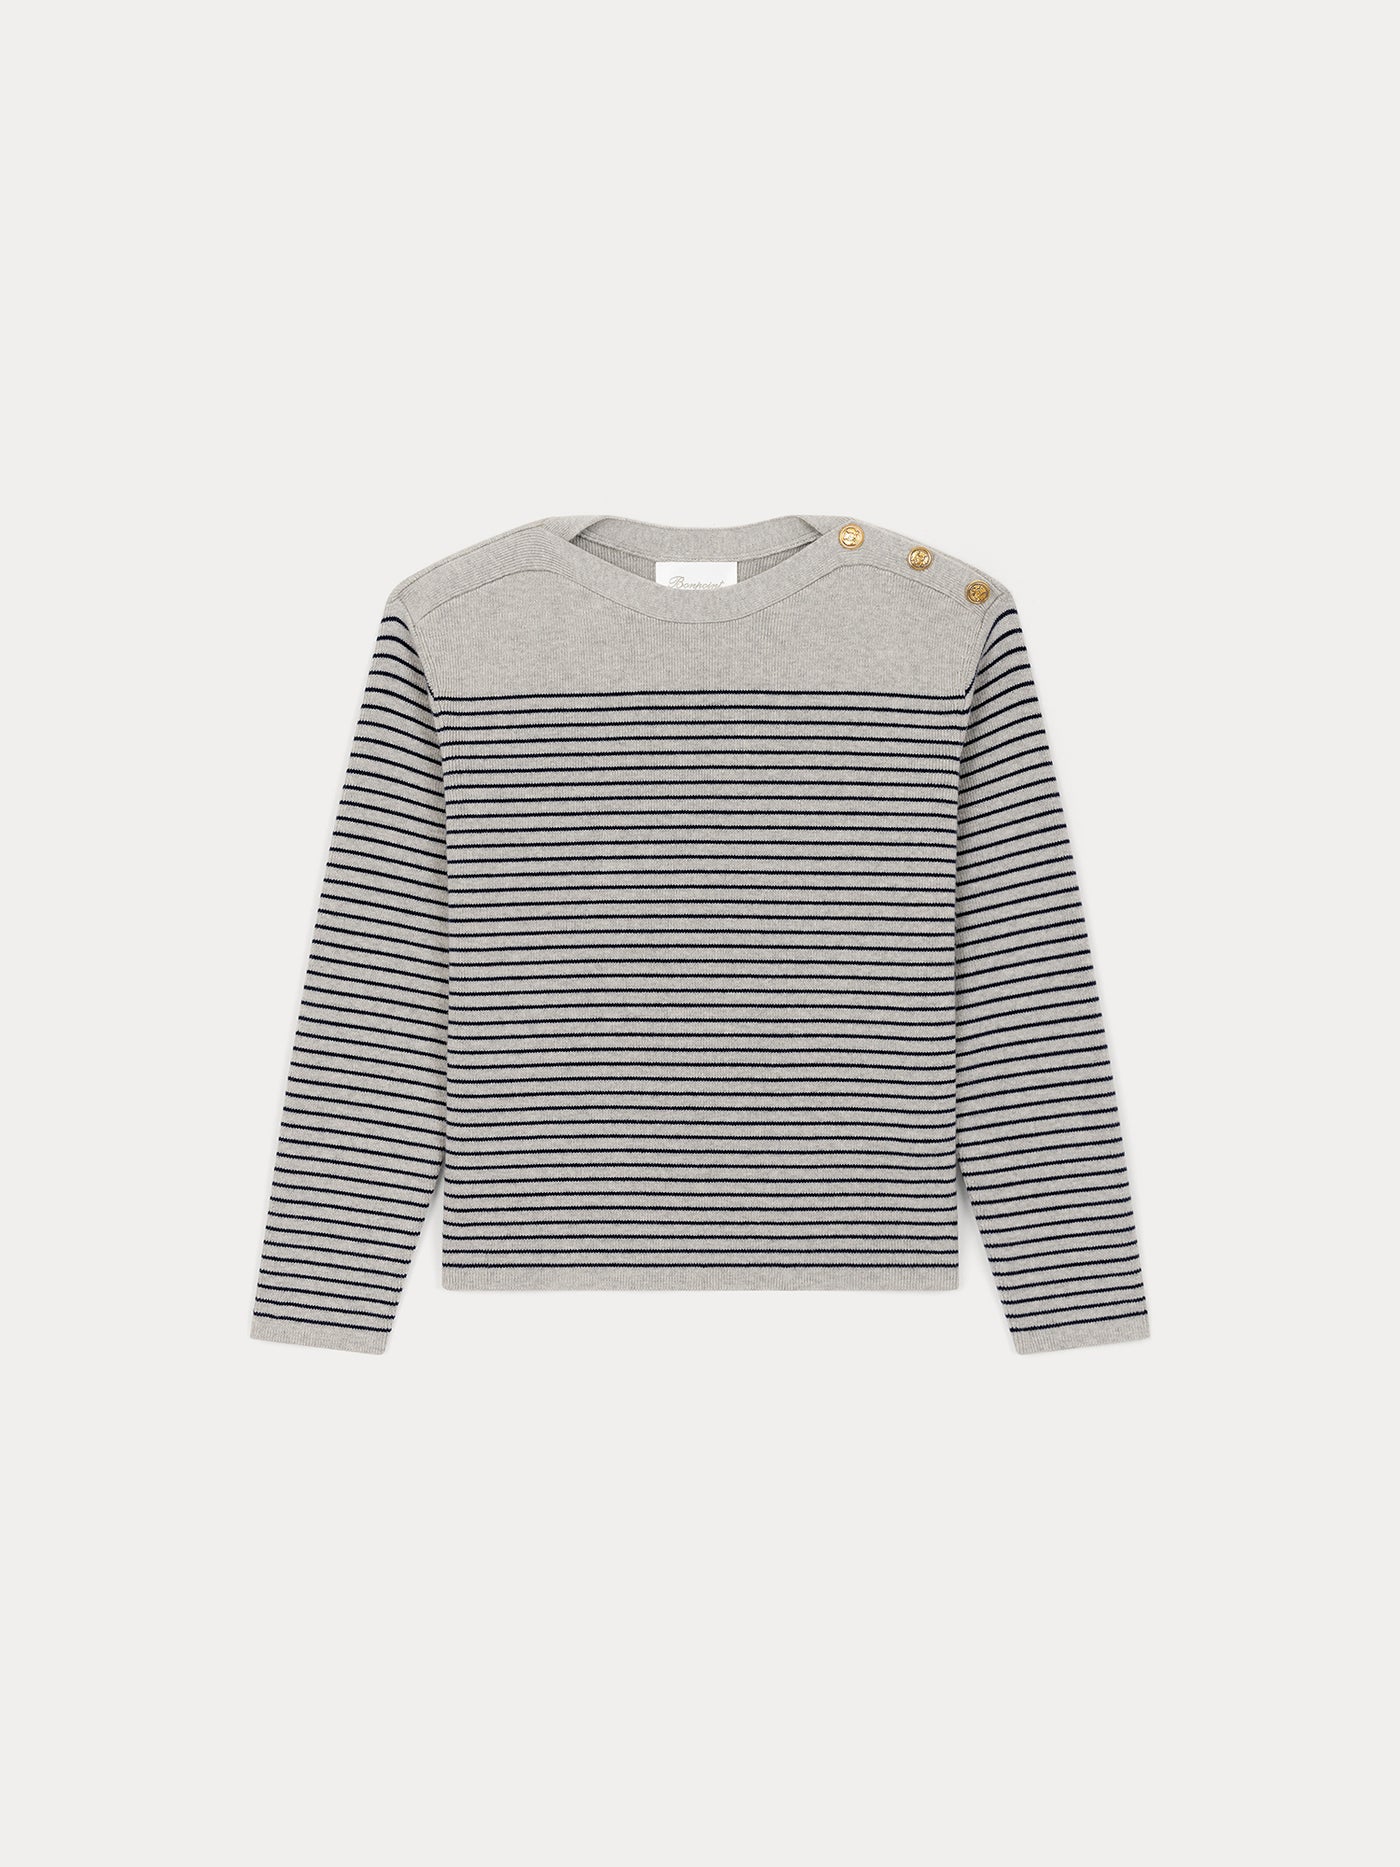 Gray sailor sweater in wool and cotton with navy stripes